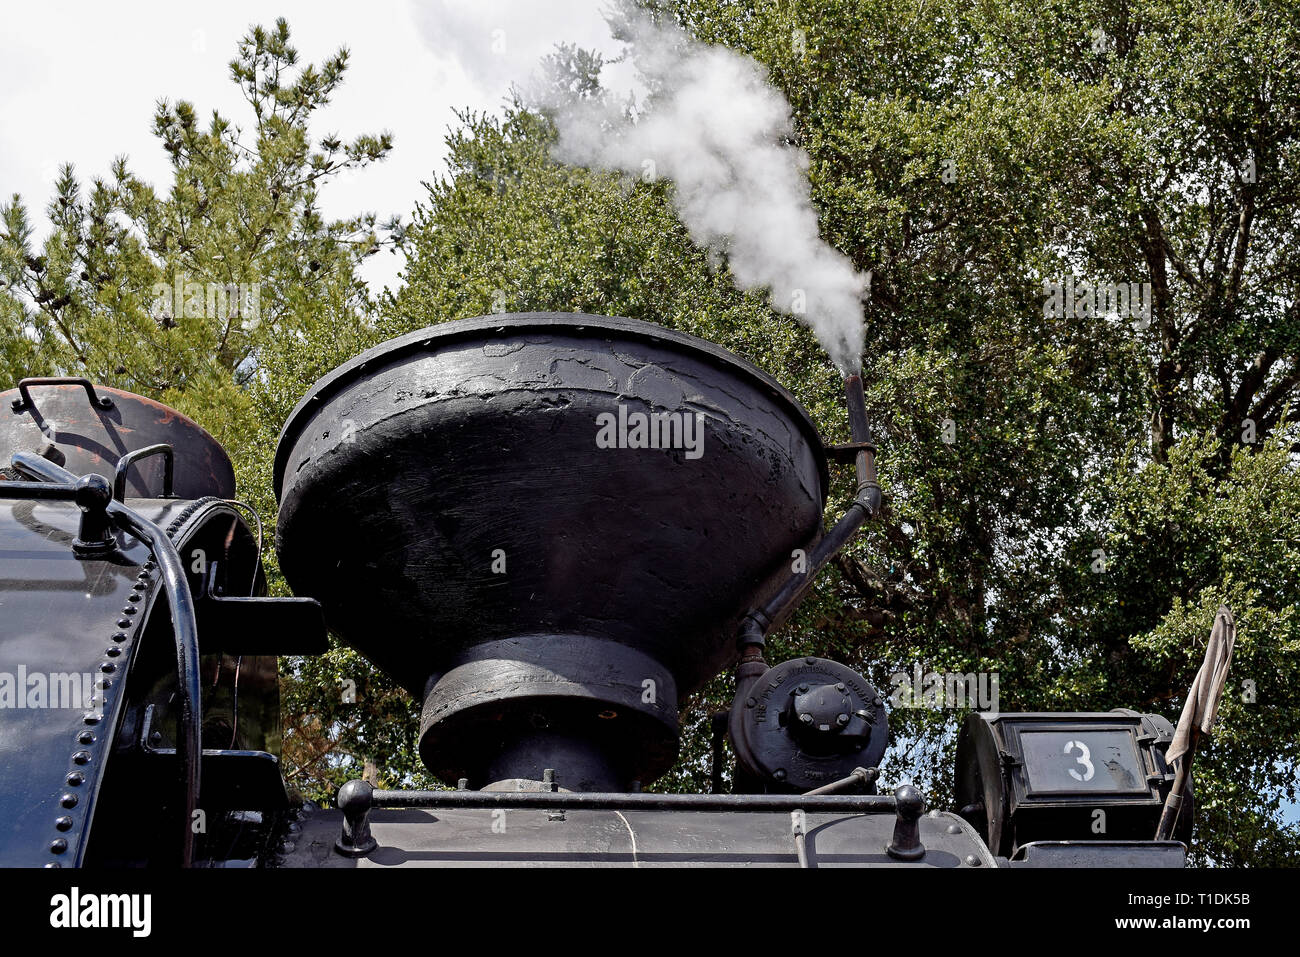 Niles Canyon railway spout on the American steam locomotive #3 at the depot in Sunol, California, Stock Photo